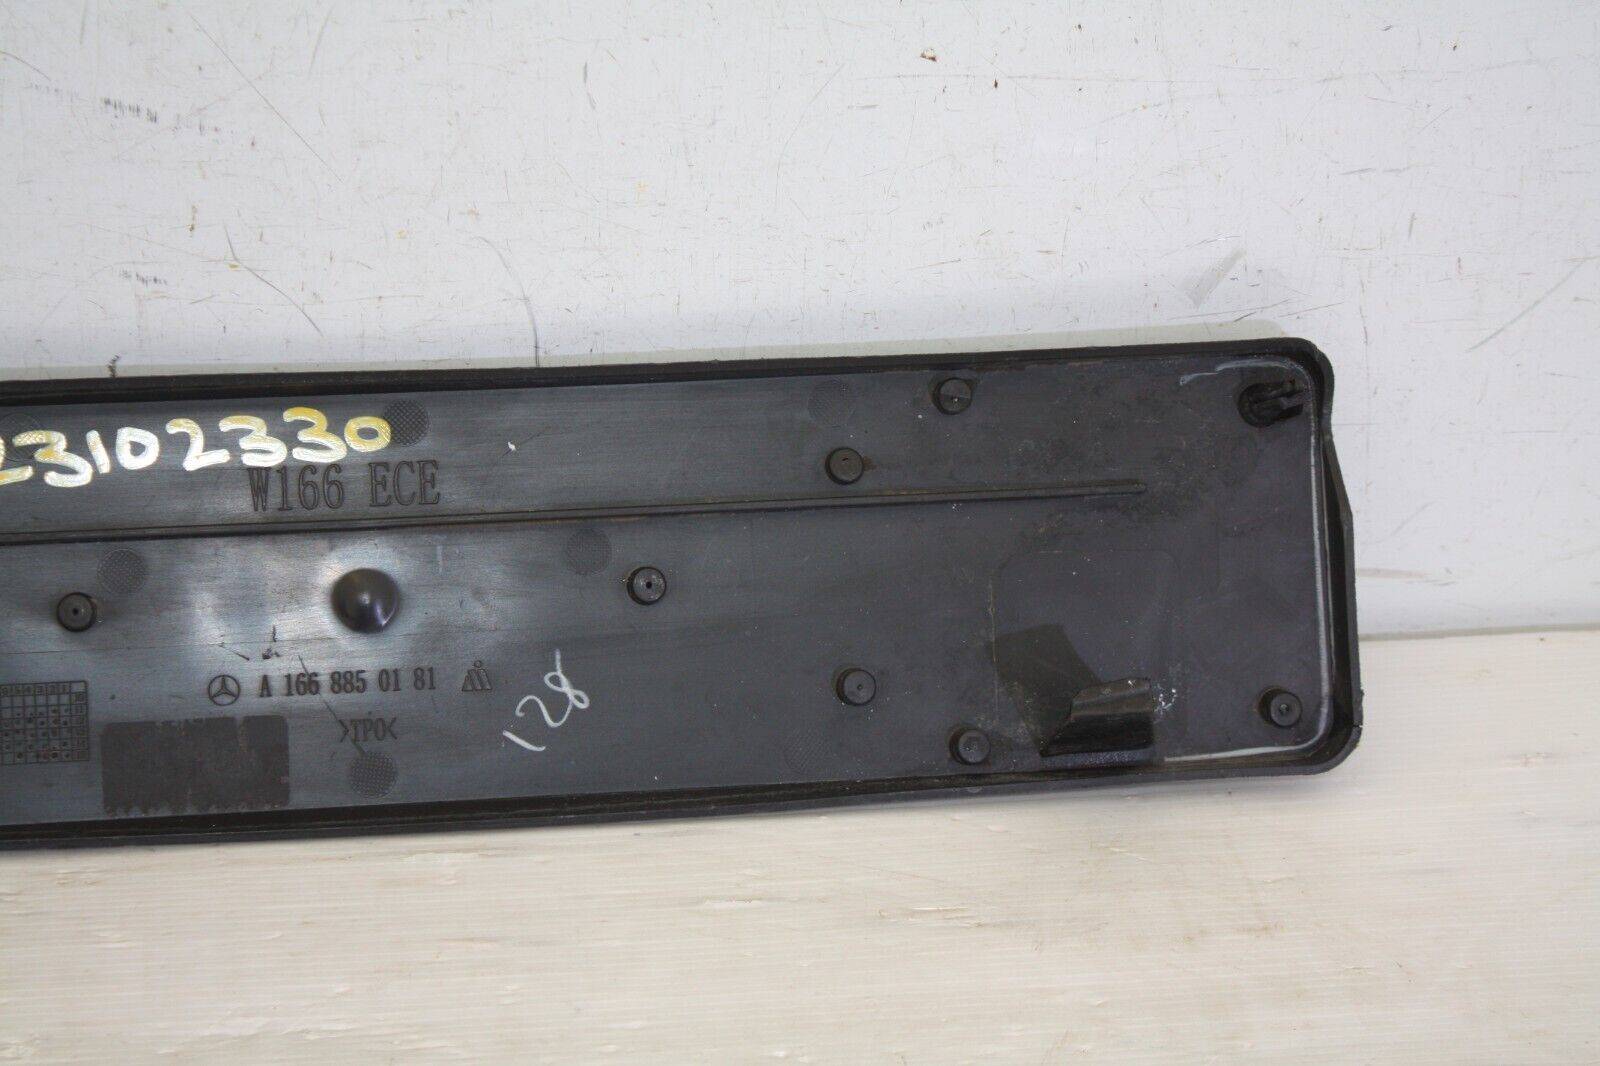 Mercedes-M-Class-W166-Front-Bumper-Number-Plate-2012-2015-A1668850181-DAMAGED-175983741173-10